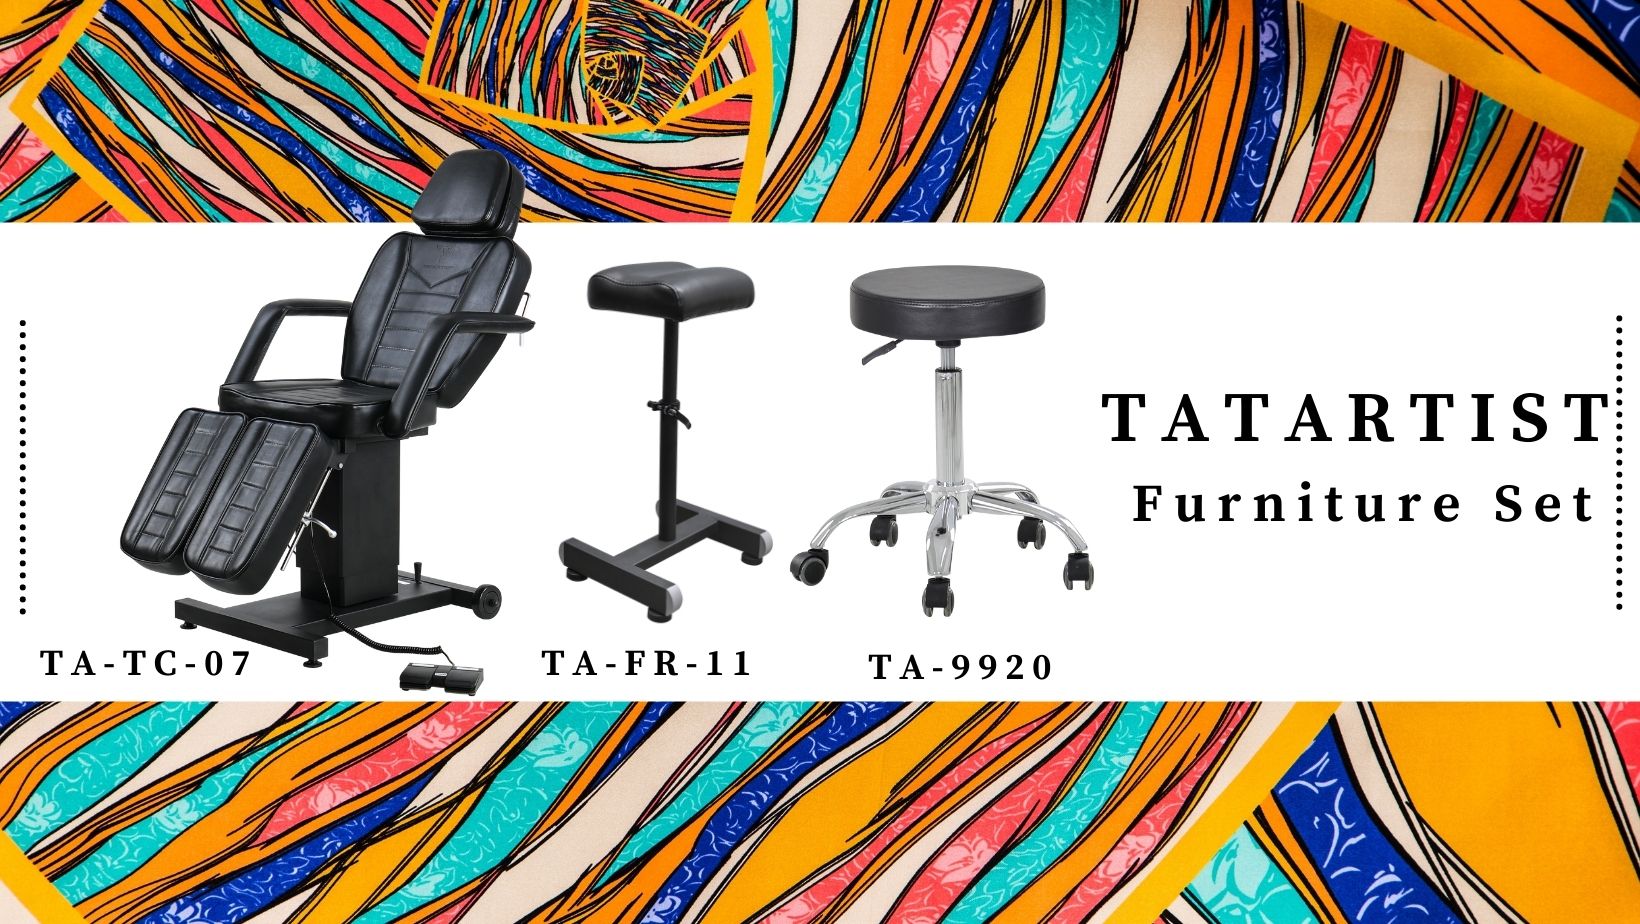 TatArtist Most Recommended Tattoo Furniture